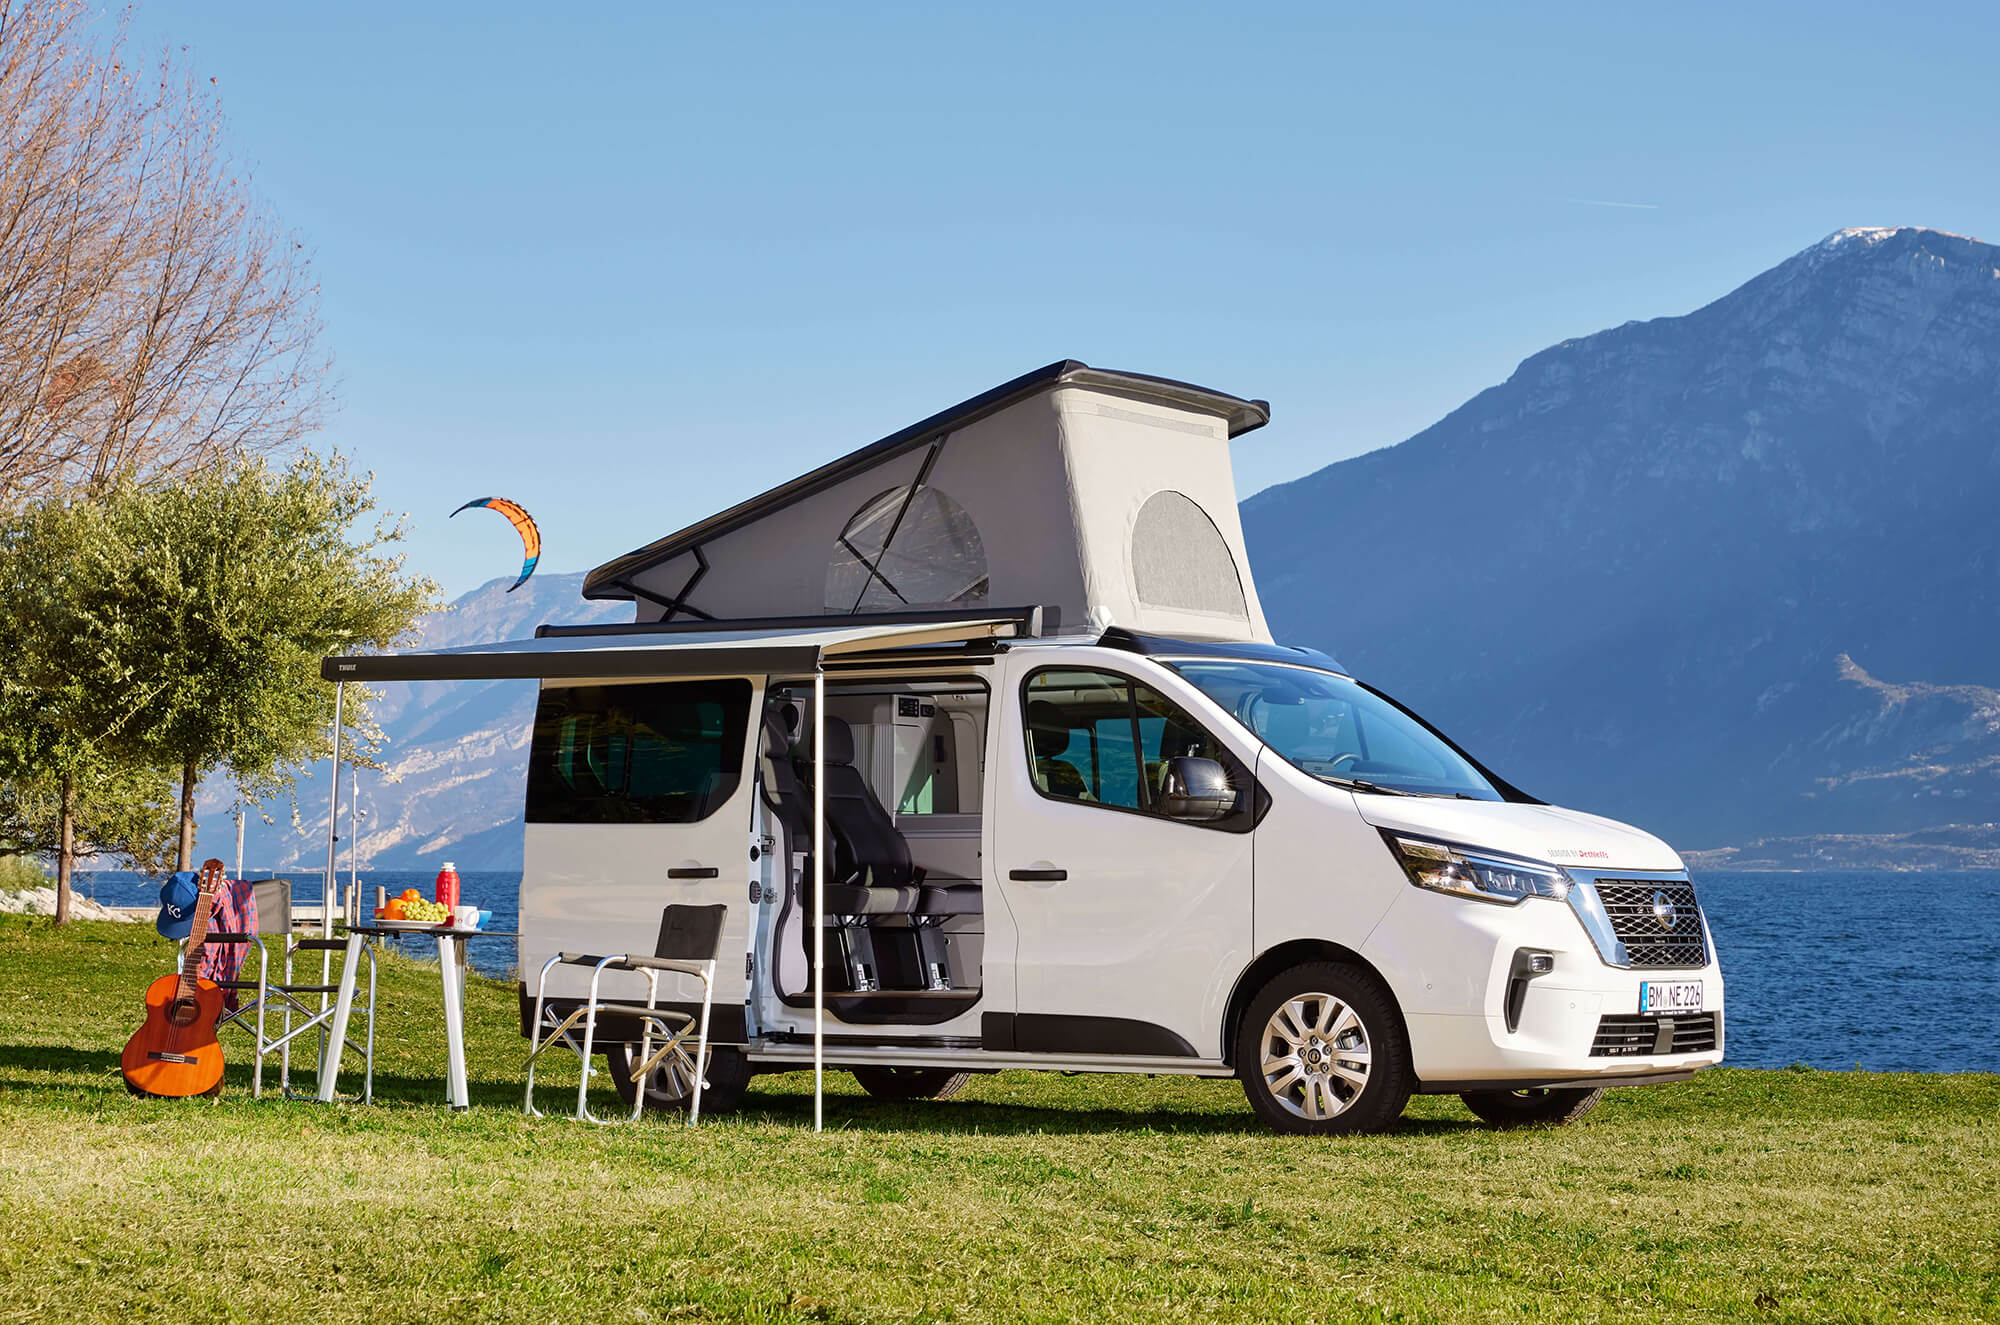 Gear up for a summer of travel with the new Nissan Primastar ‘Seaside’ campervan